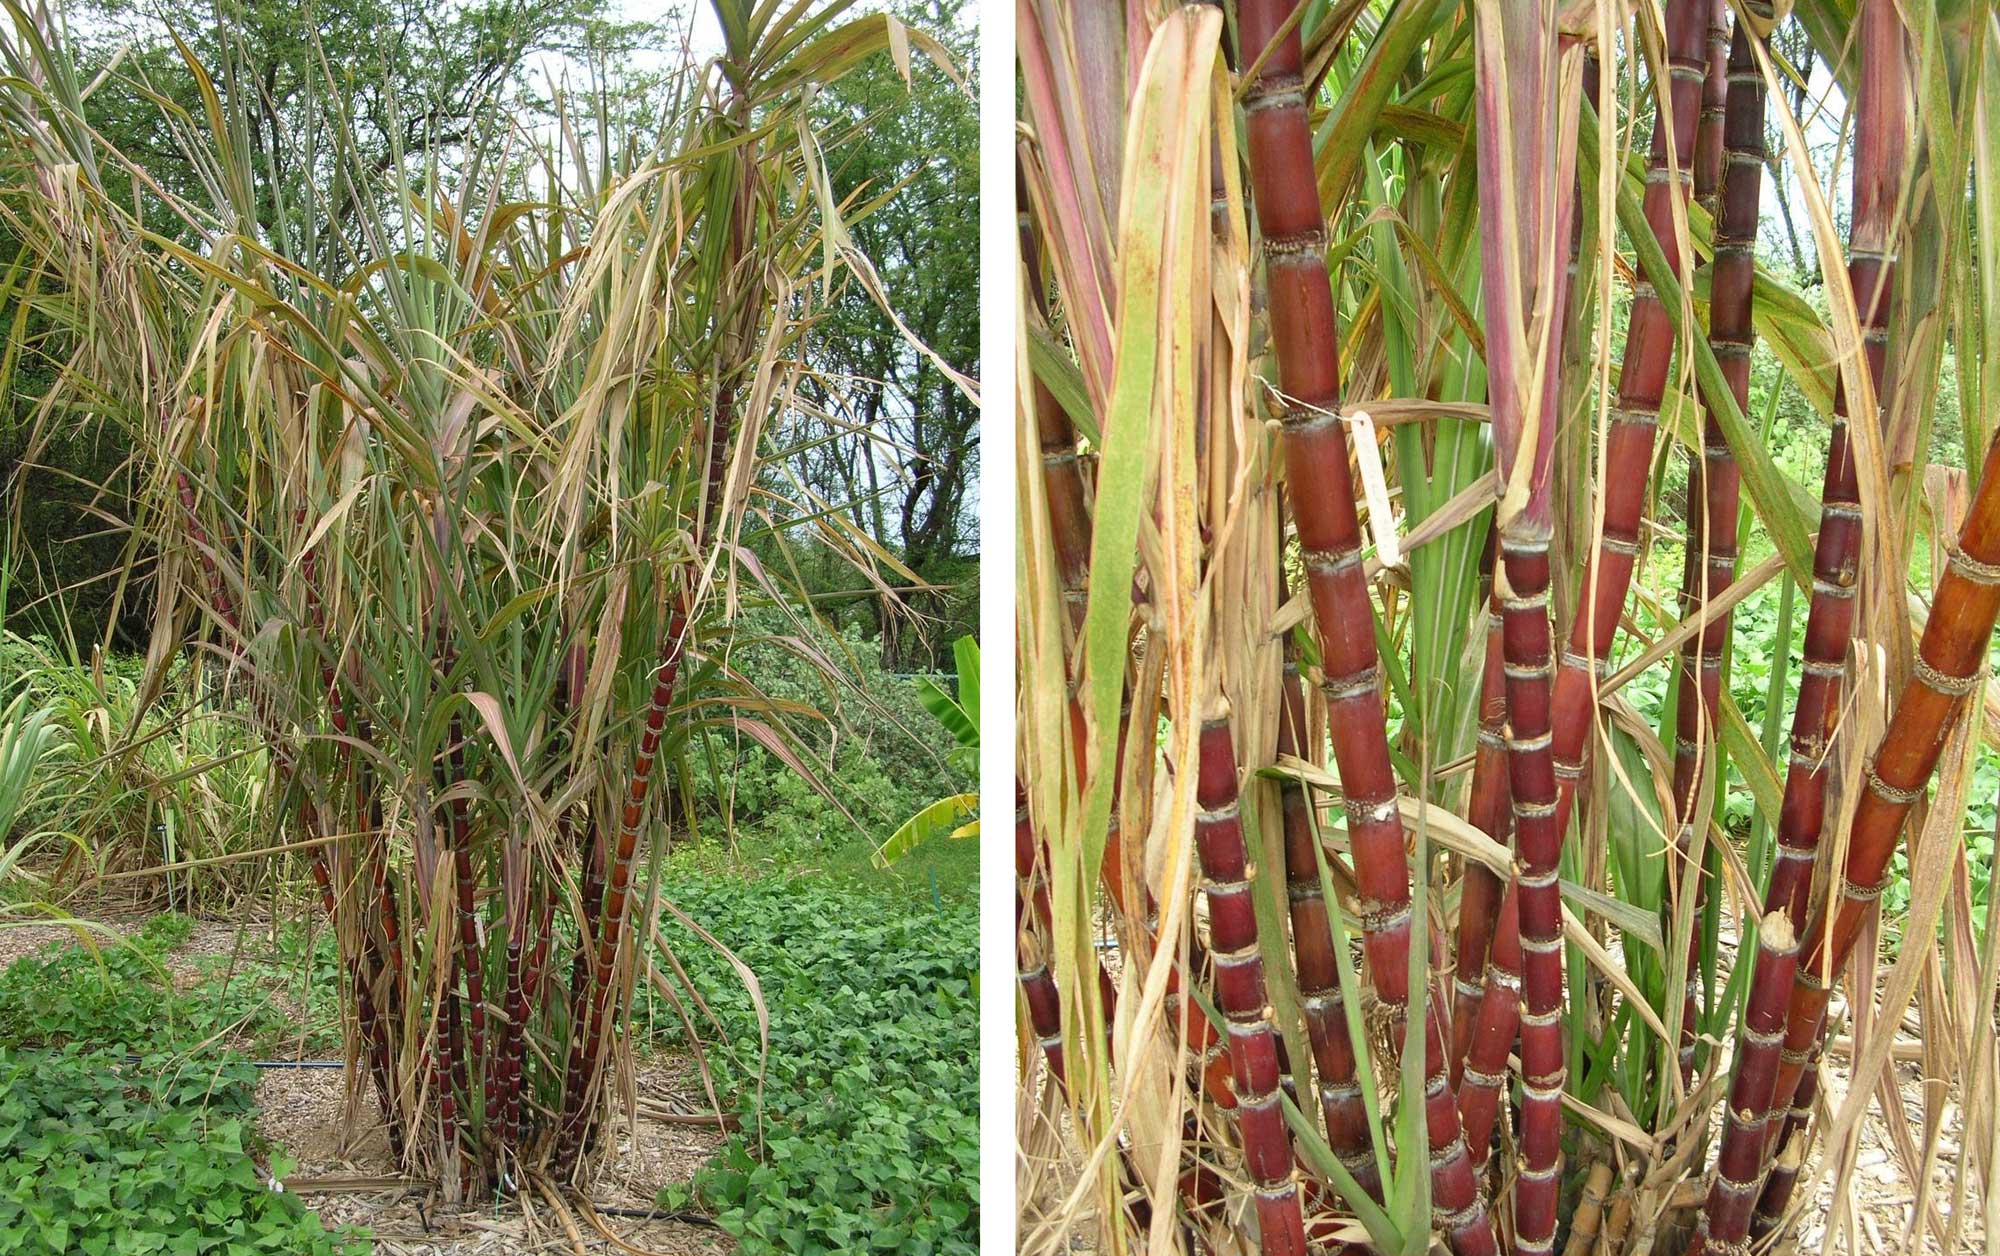 Two-panel photograph figure made up of pictures showing sugarcane stems. Panel 1: A small clump of sugarcane plants with reddish stems that have narrower white bands at regular intervals. The white bands are the nodes. The upper parts of the stem bear long, thin leaves. Panel 2: A closer view of the stems.